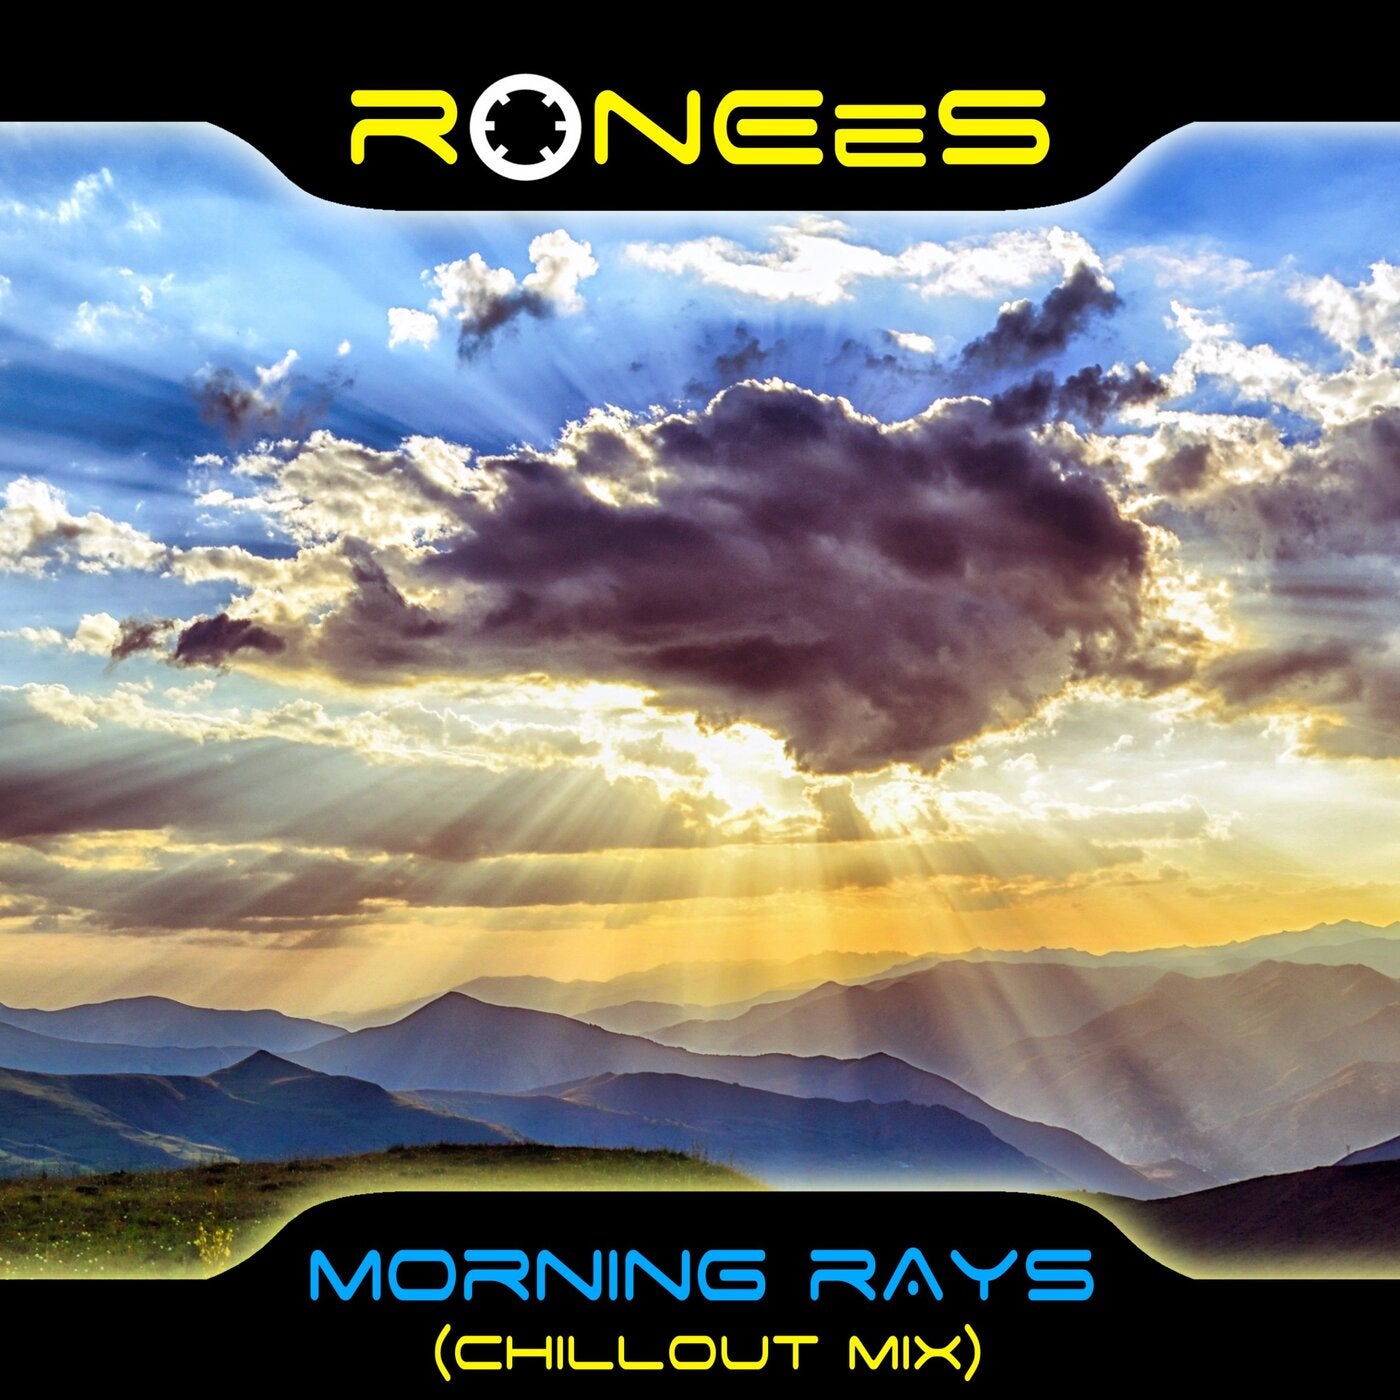 Morning Rays (Chillout Mix)